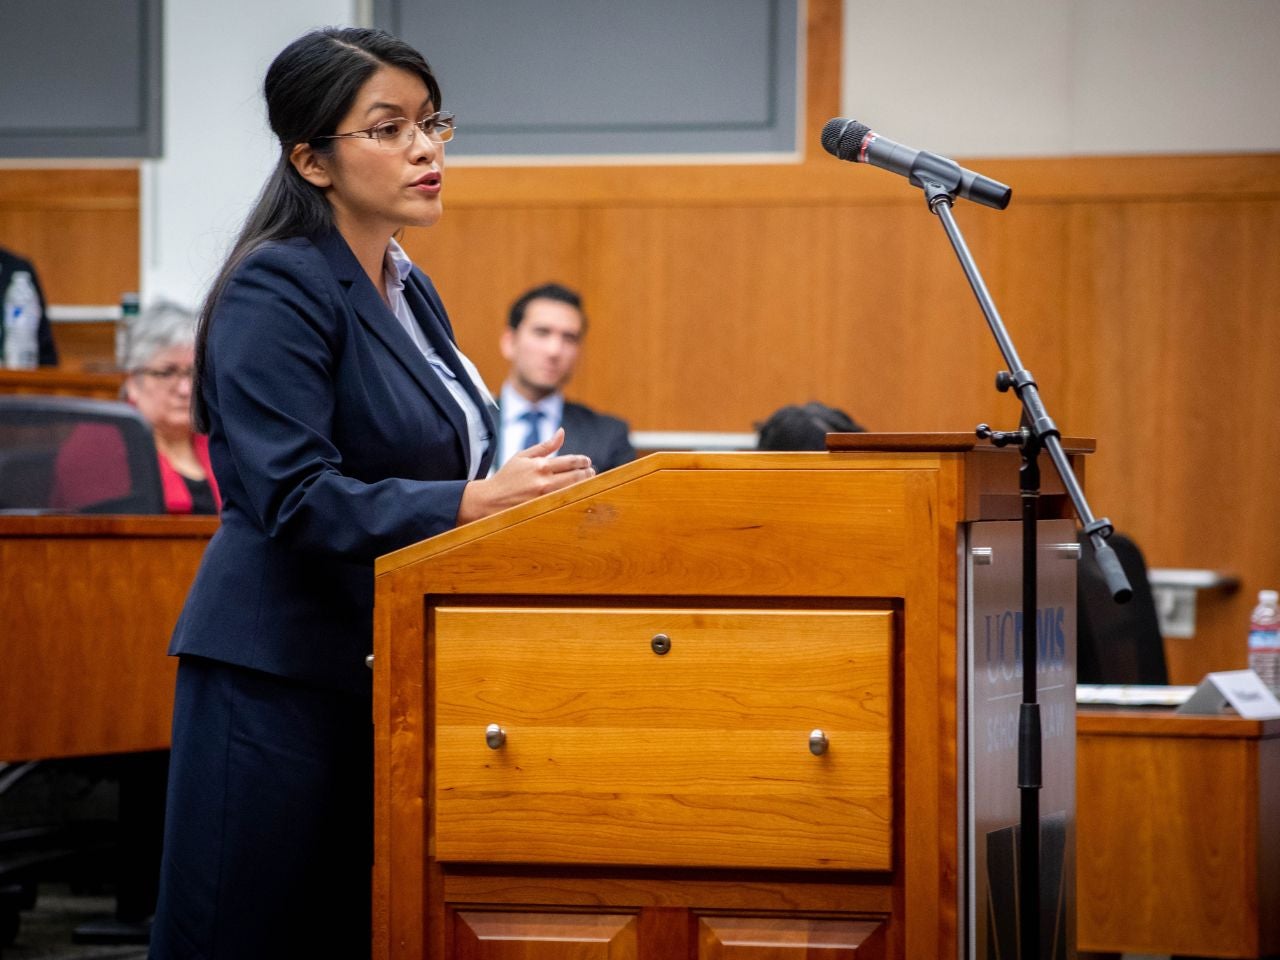 A student in business attire stands at a podium, speaking into a microphone, while onlookers listen.